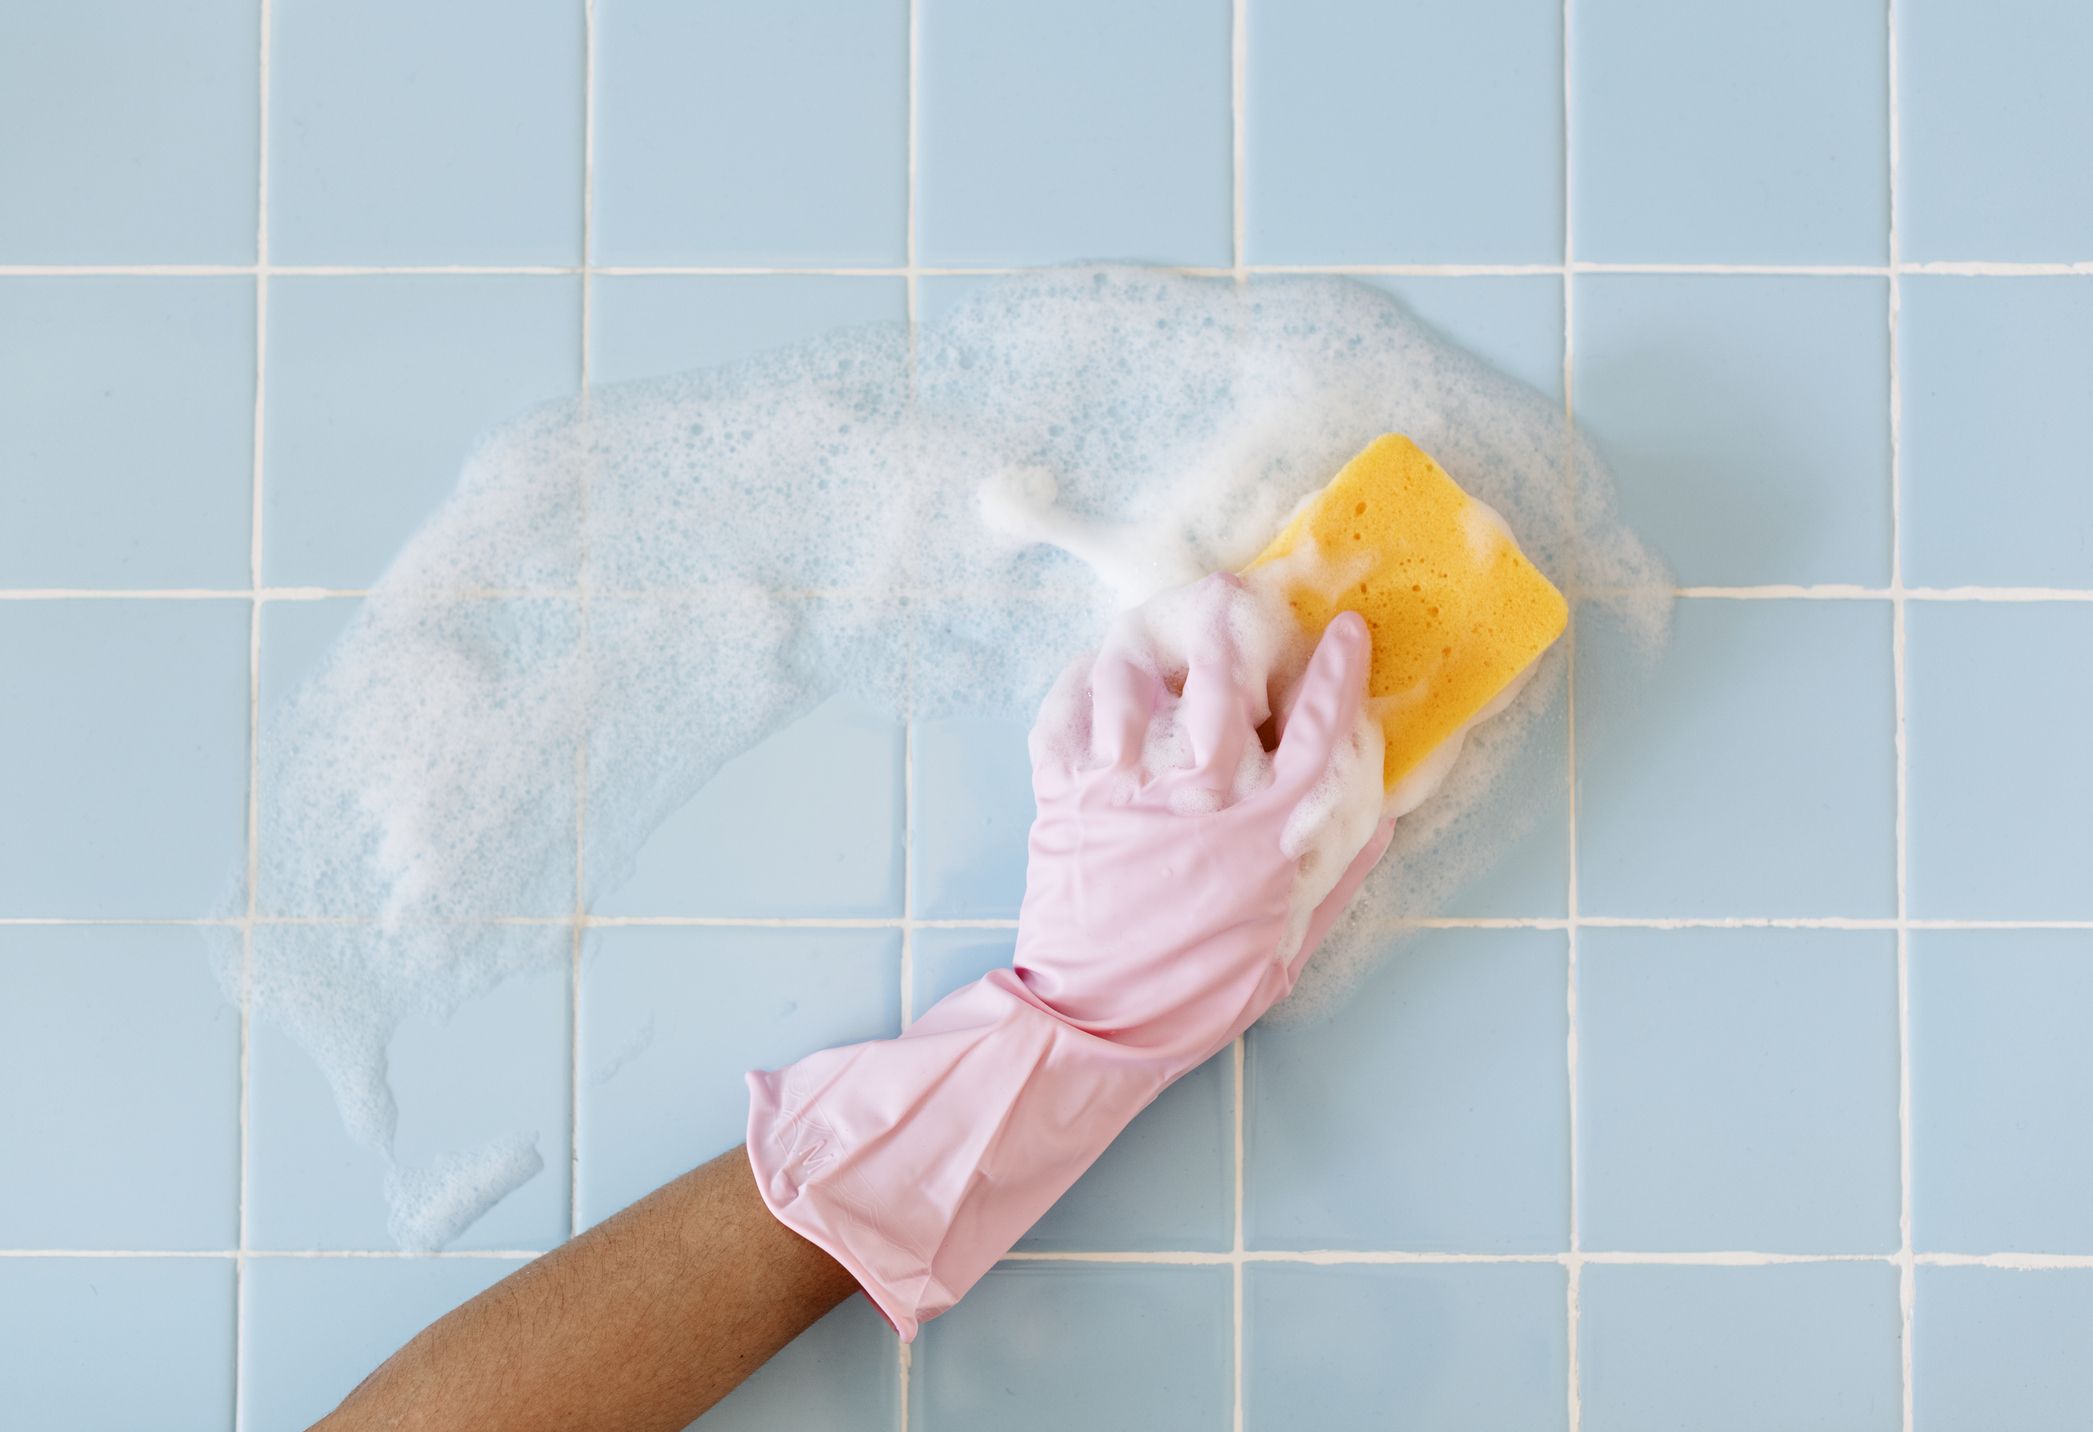 30 Tried & Tested cleaning hacks from the experts